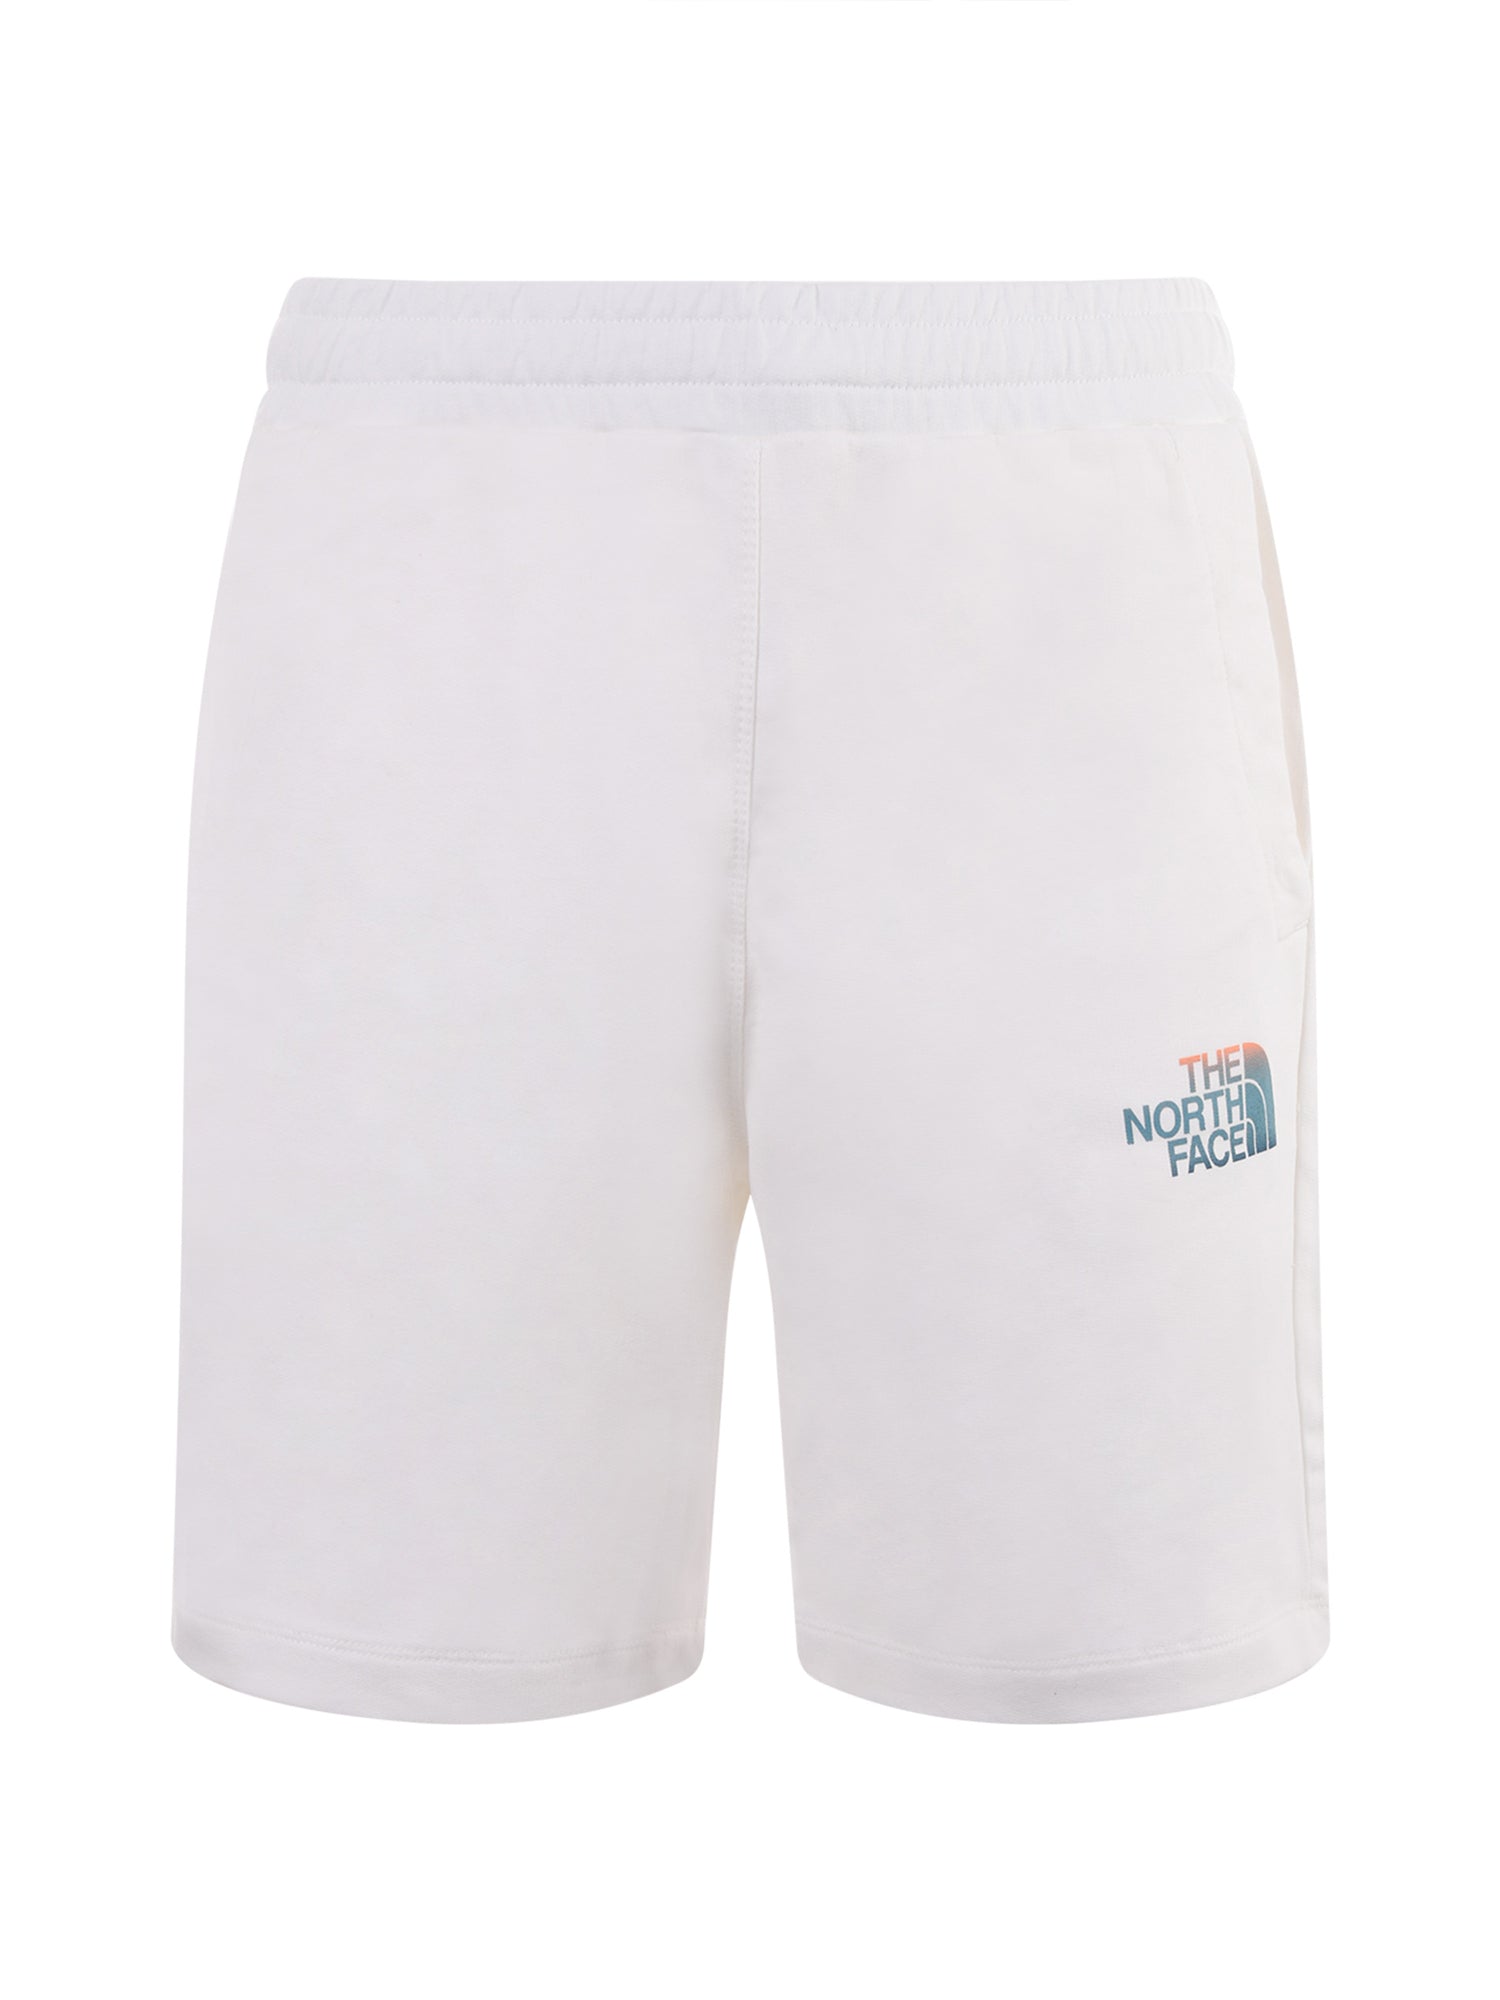 THE NORTH FACE SHORTS D2 GRAPHIC BIANCO